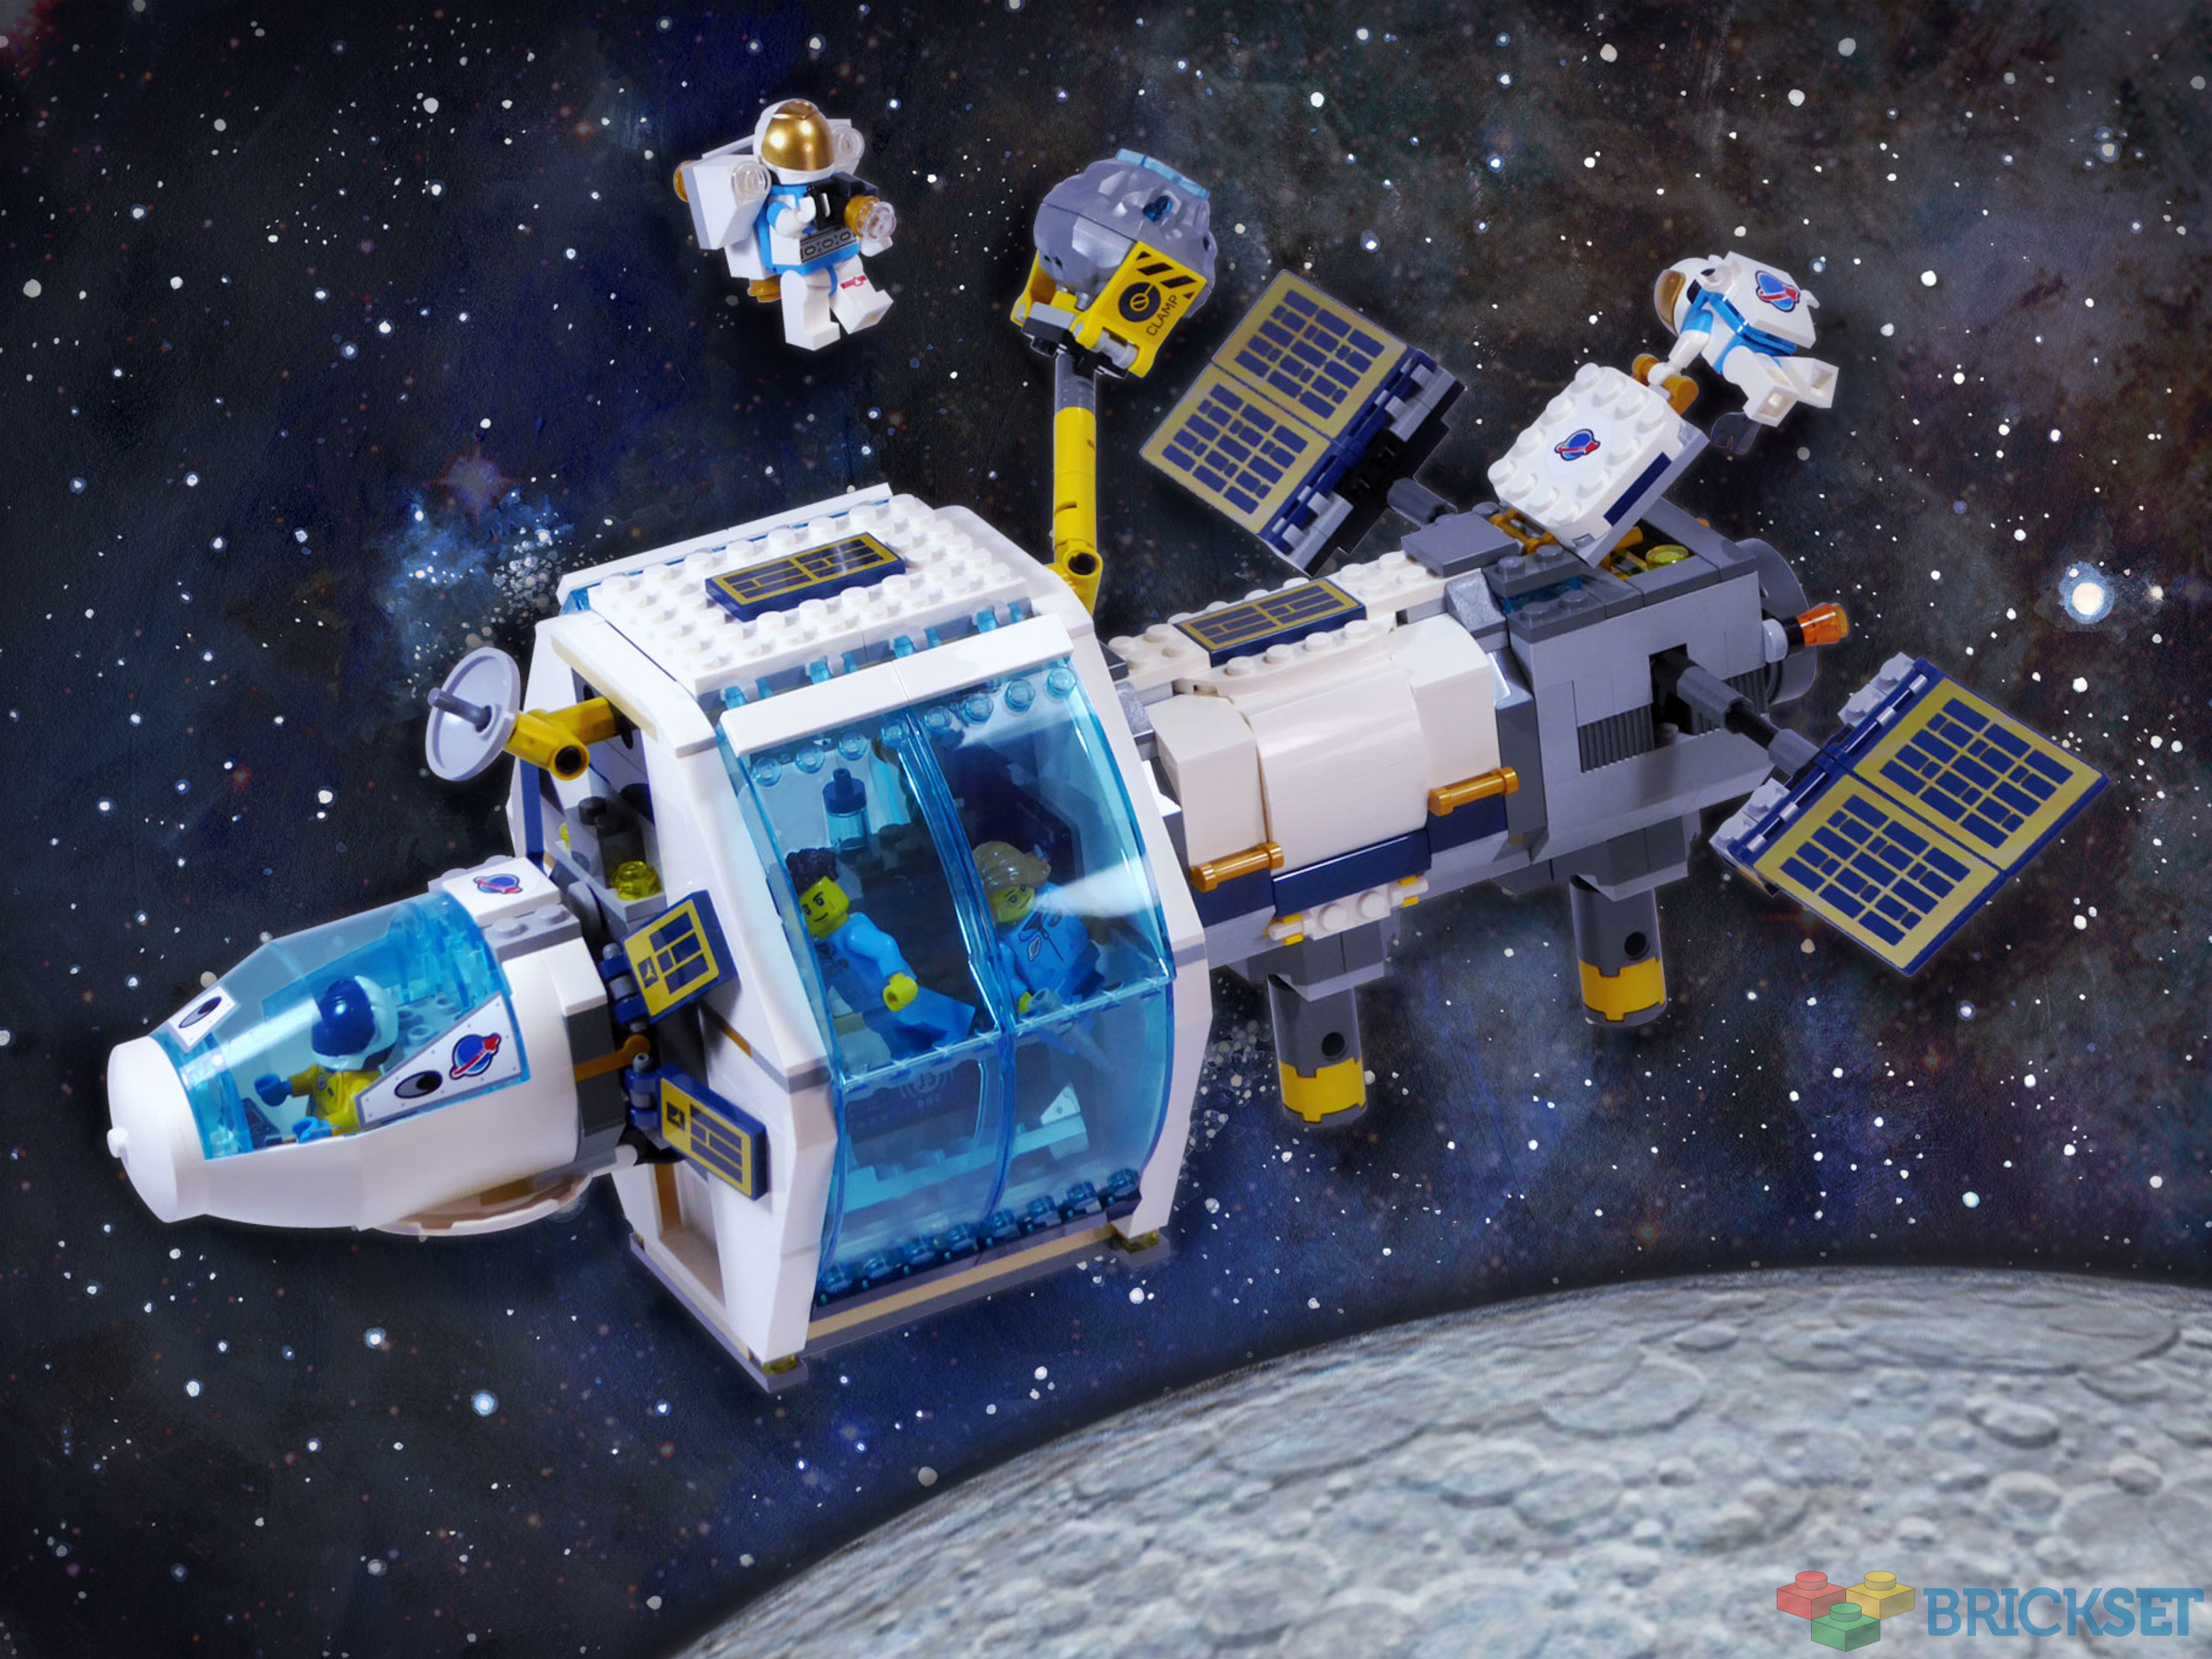 LEGO 60349 Lunar Space Station review |